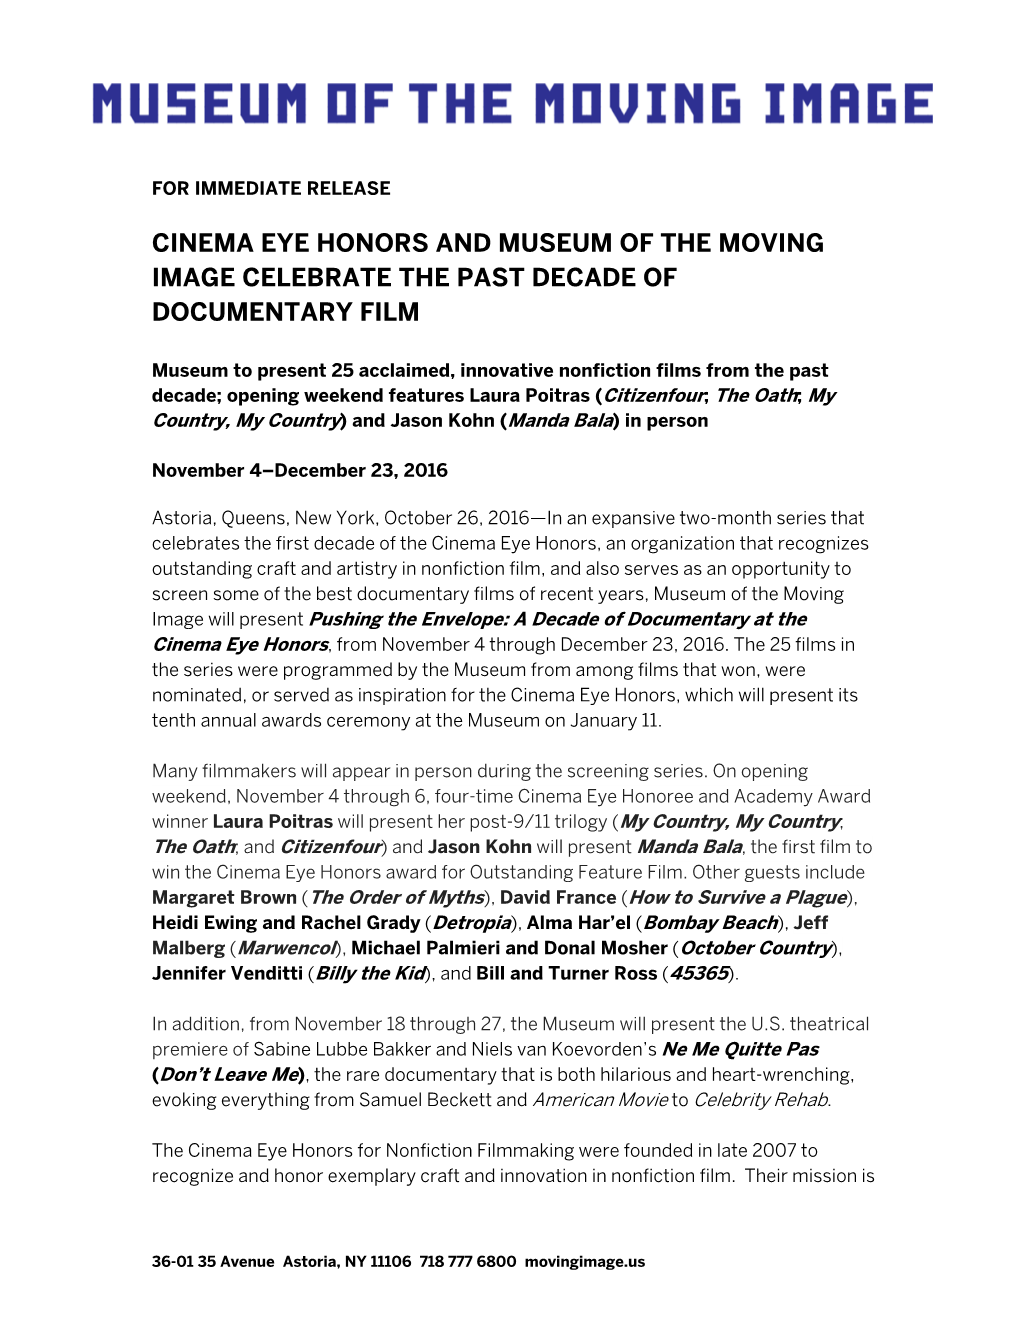 Cinema Eye Honors and Museum of the Moving Image Celebrate the Past Decade of Documentary Film